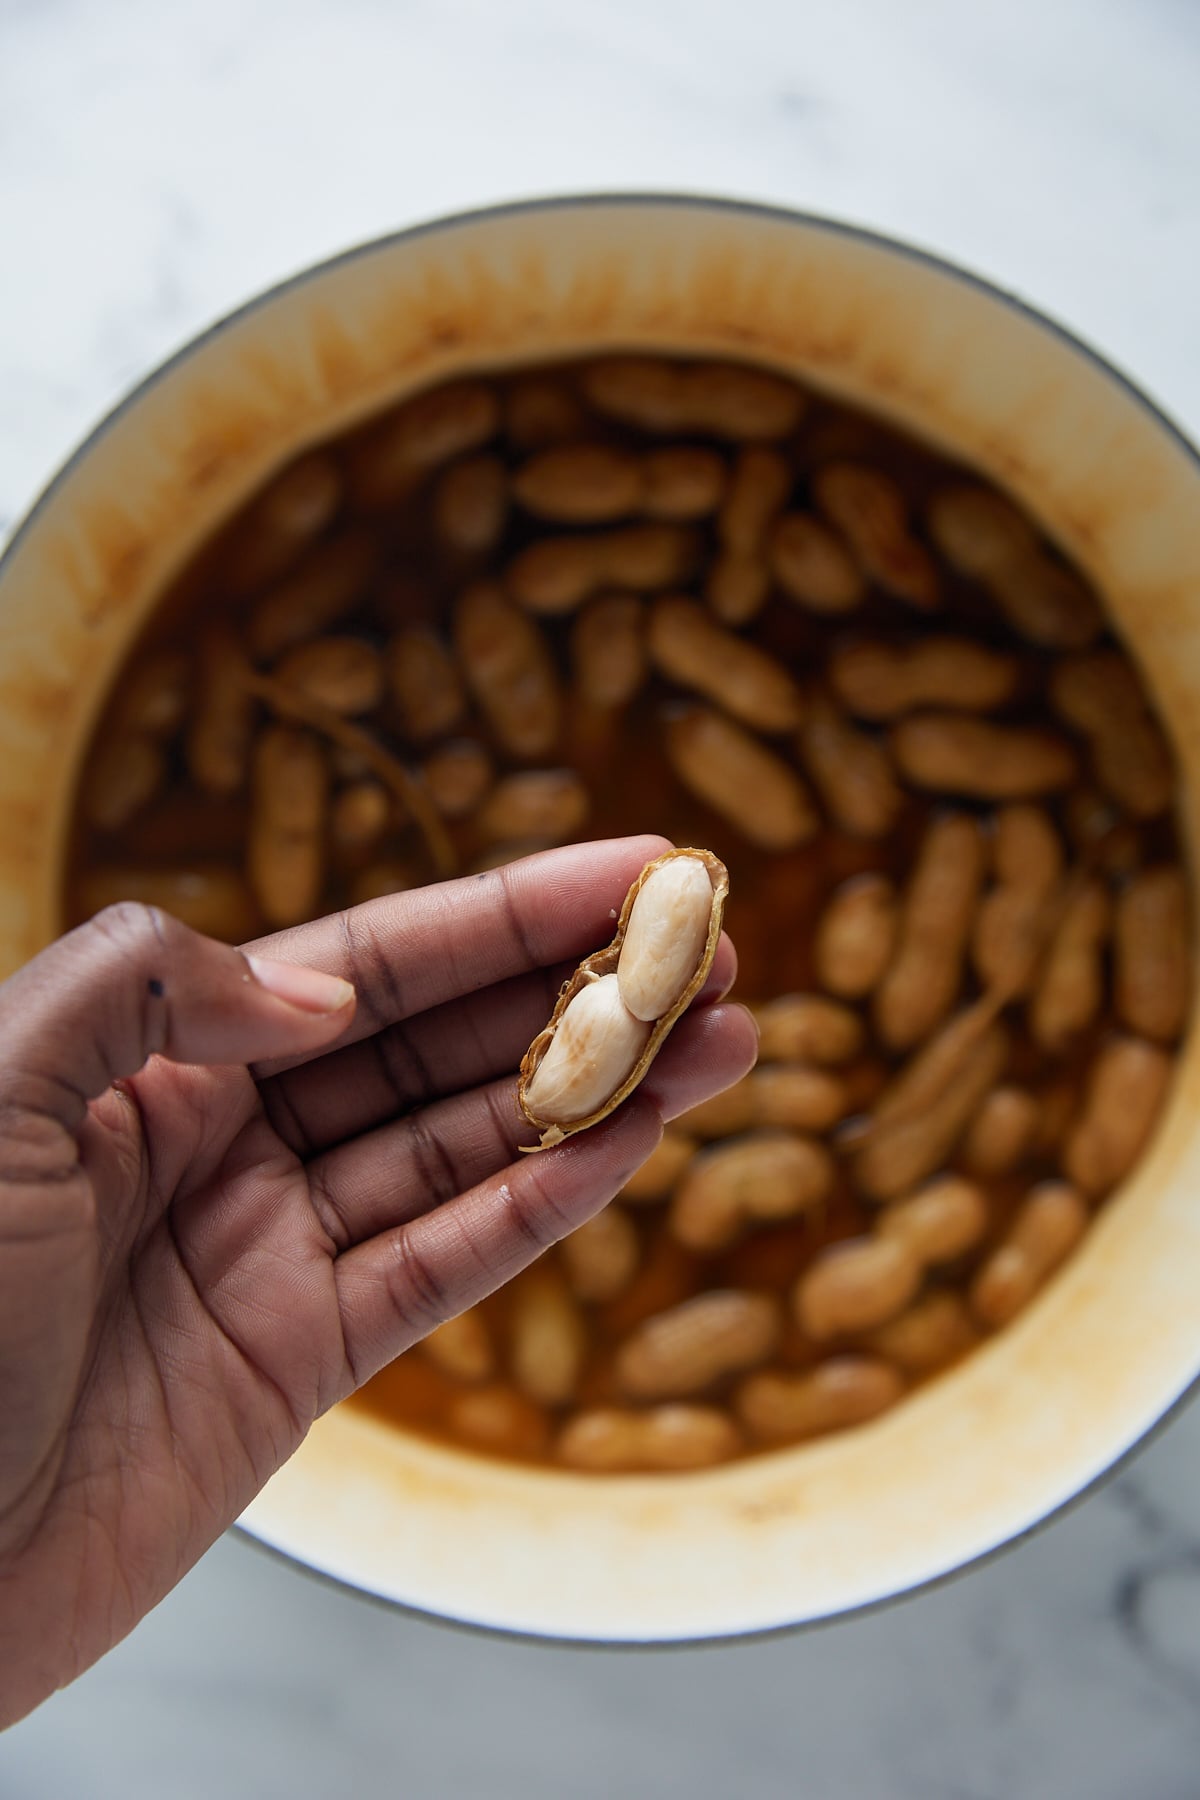 A hand holding a boiled peanut.